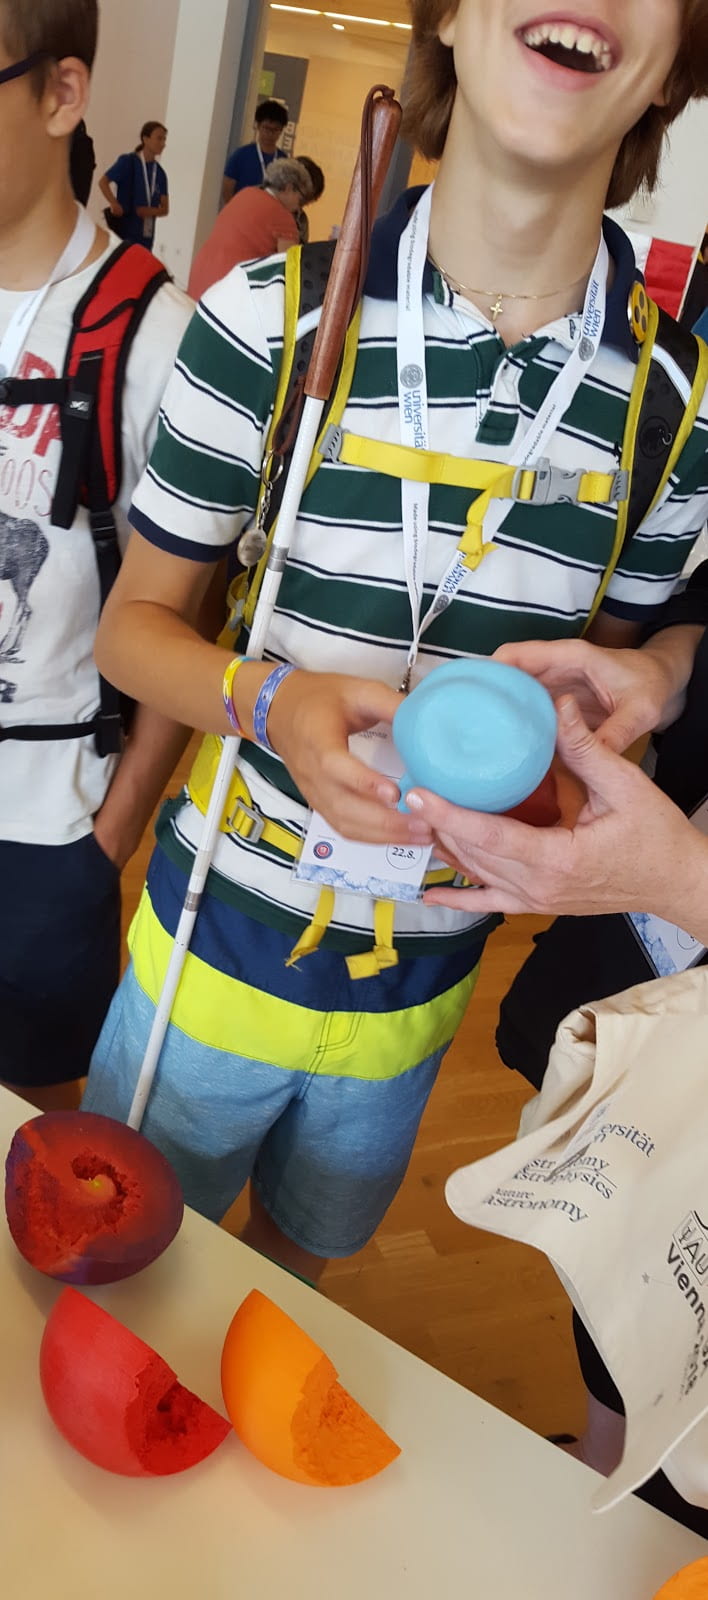 A student with visual impairment holds a 3D printed model of the Eta Carinae Homunculus nebula.